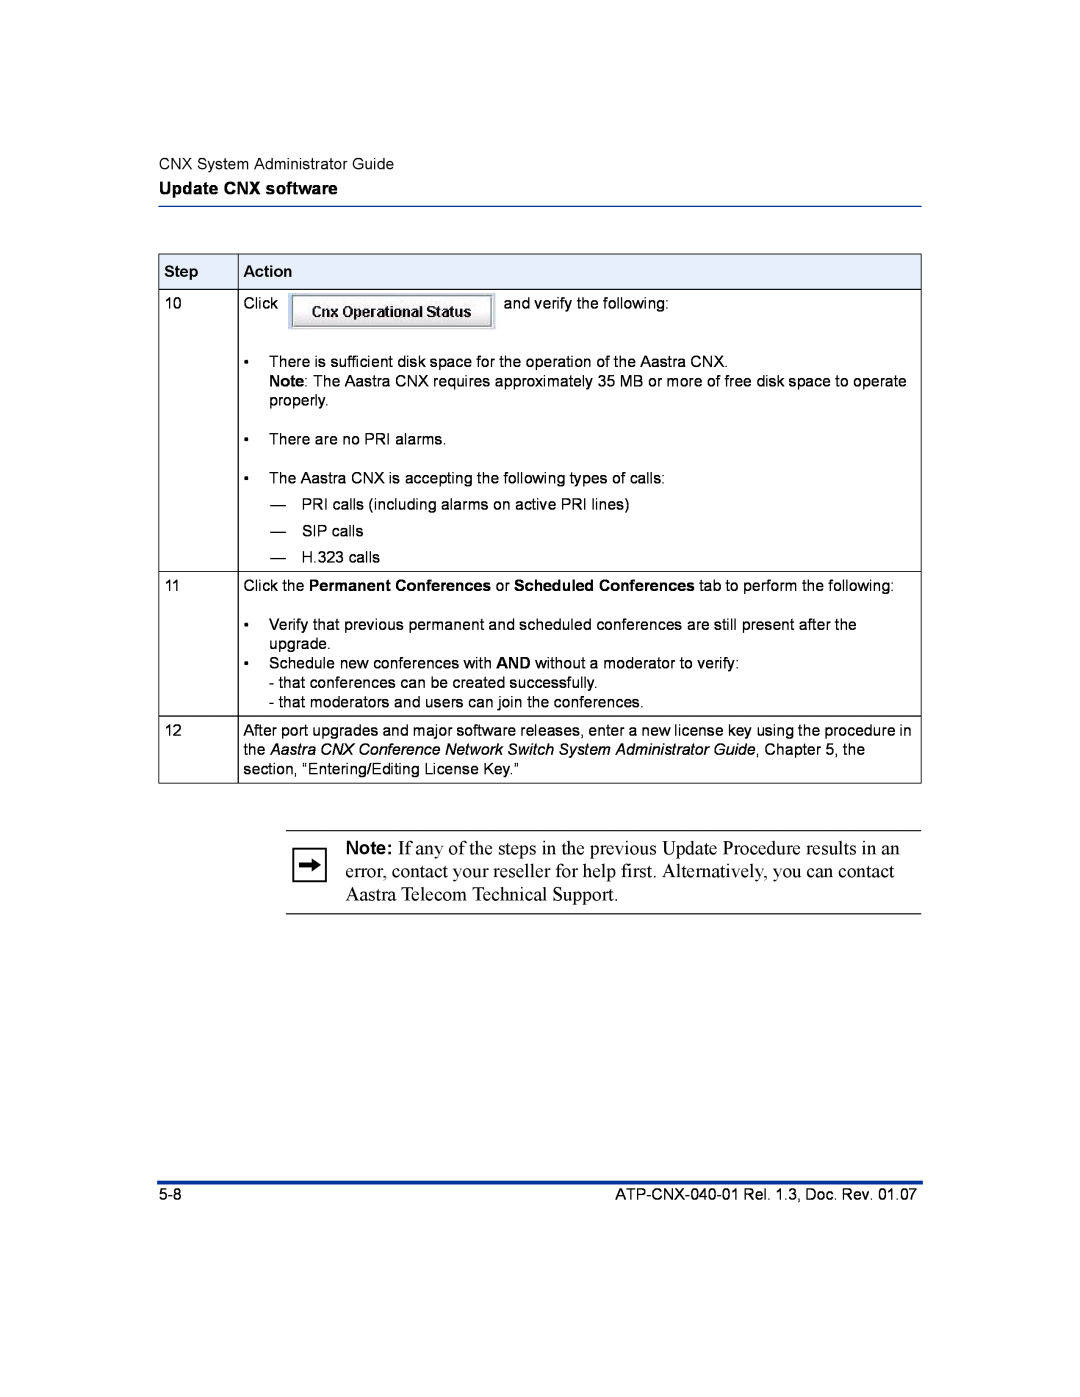 Aastra Telecom ATP-CNX-040-01 manual Update CNX software, Step, Action 